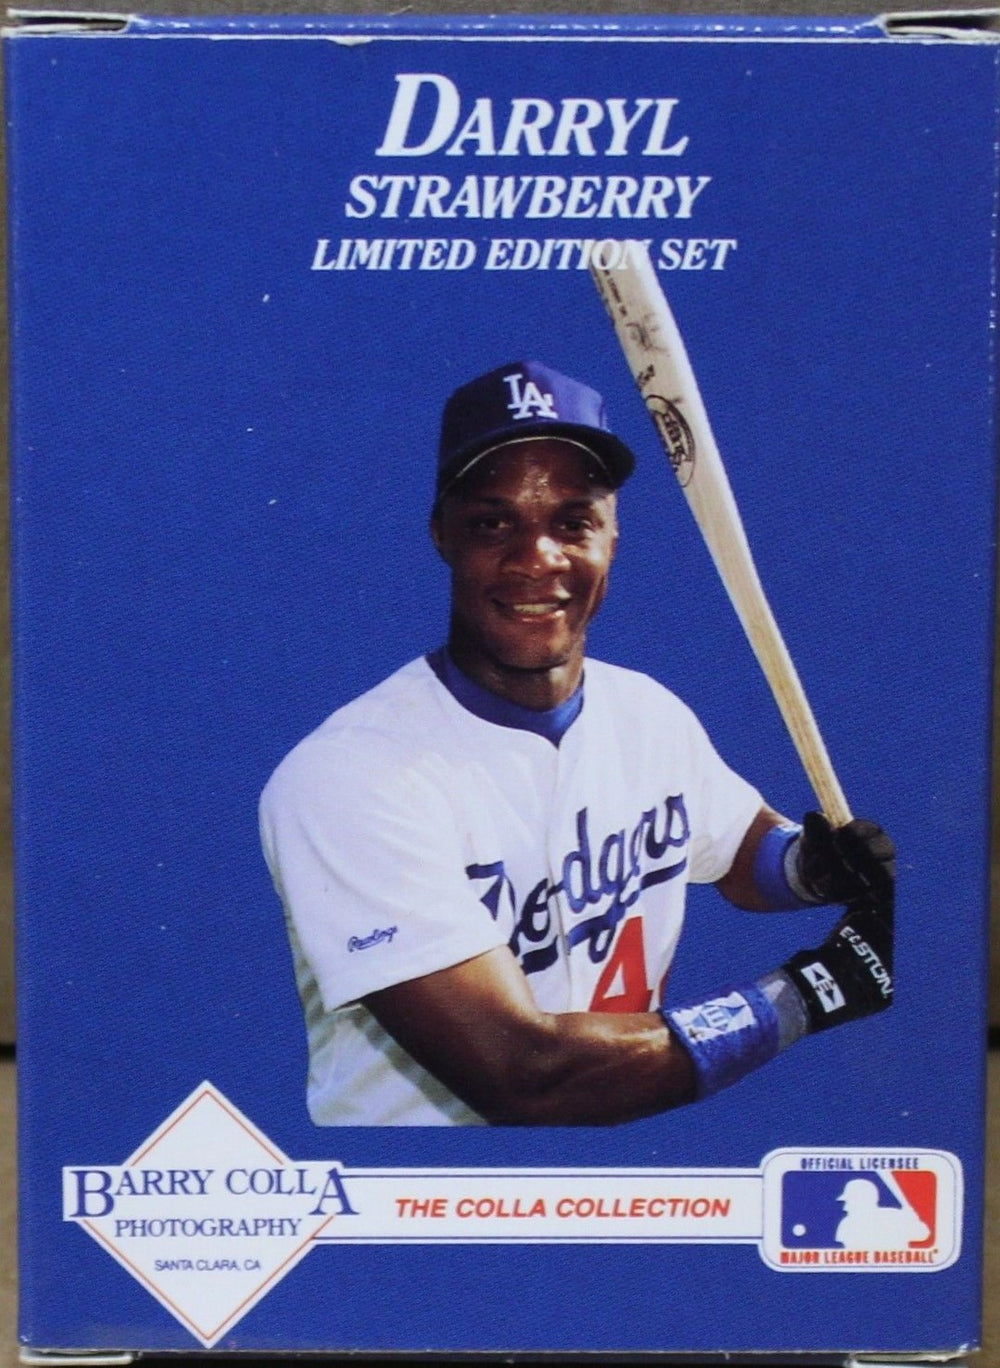 Los Angeles Dodgers on X: Mike Piazza, Darryl Strawberry, and